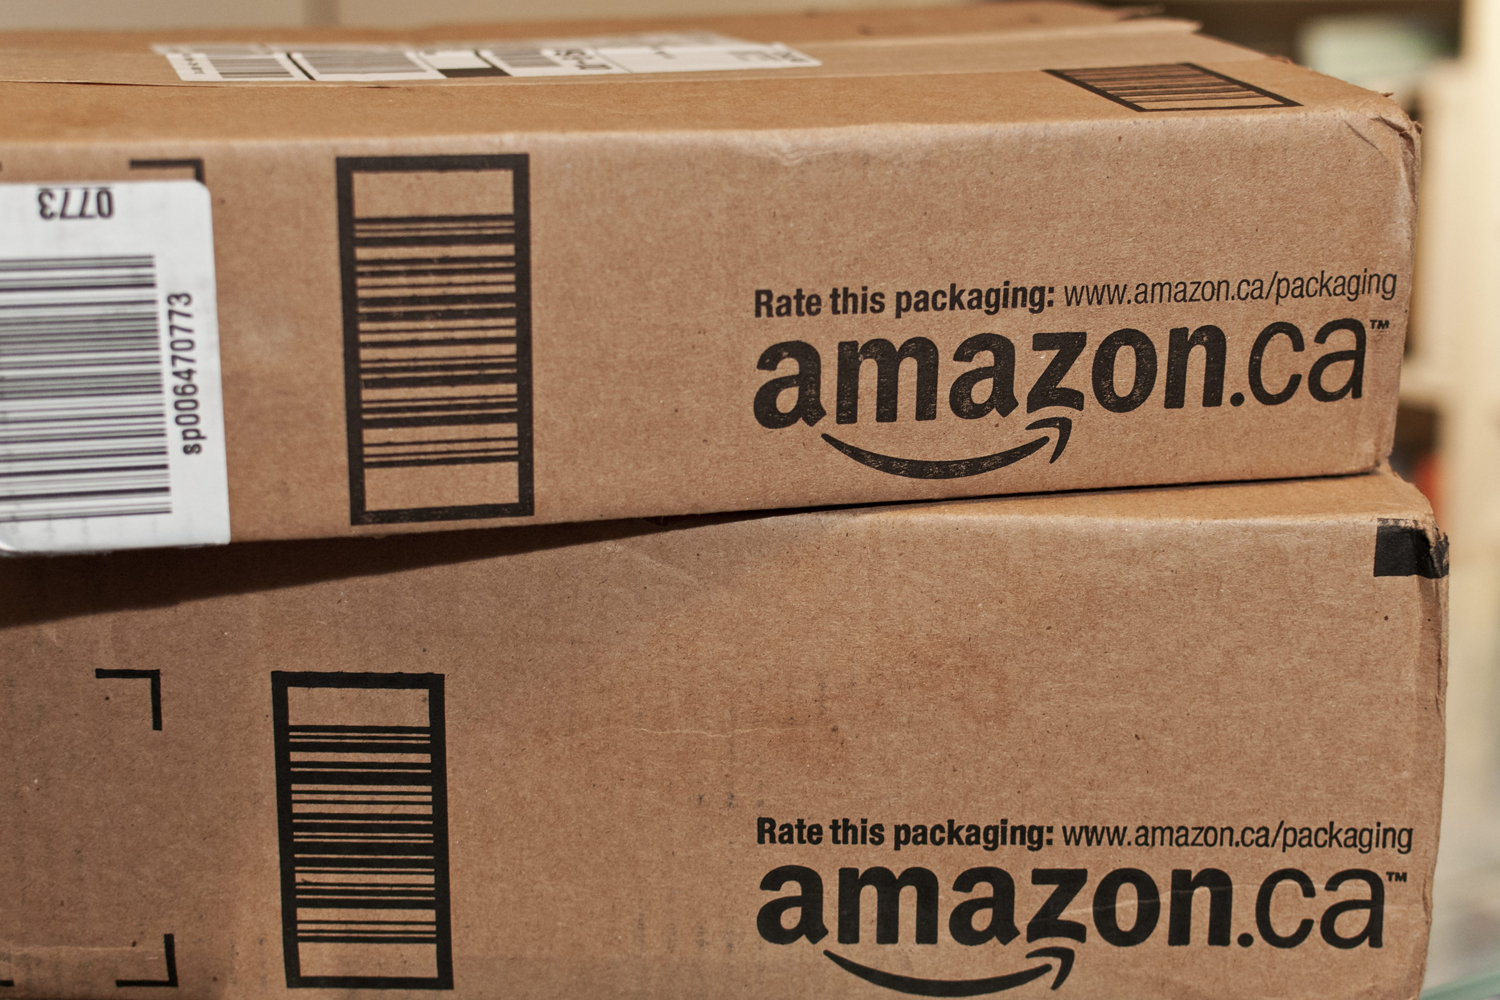 Cornwall throws hat in the ring for Amazon HQ